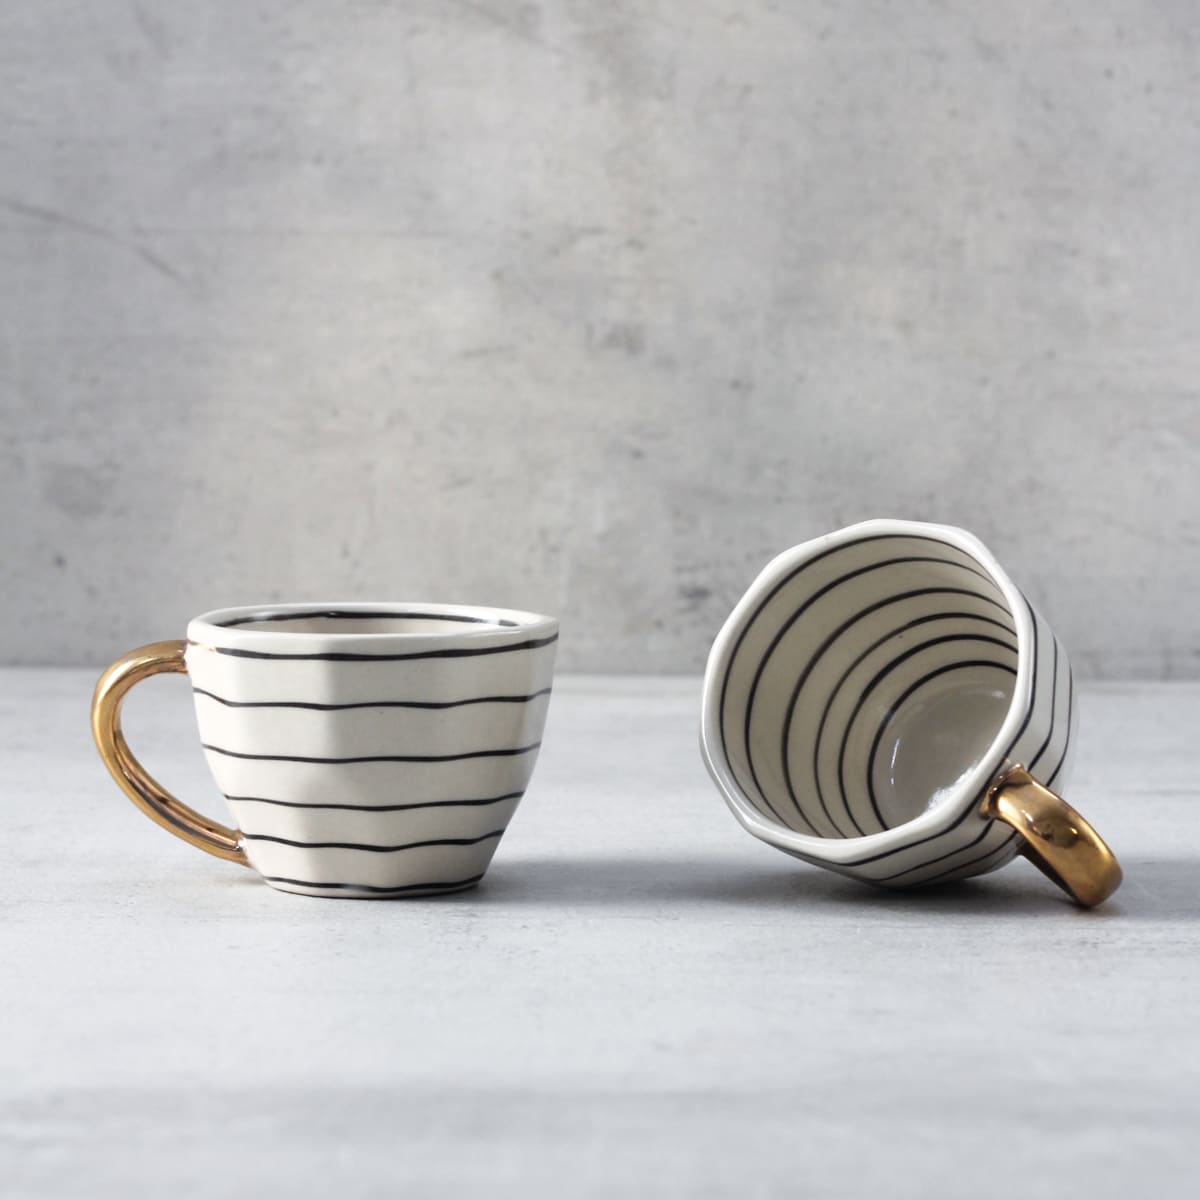 Esmee Striped Handmade Ceramic Cup with Golden Handle